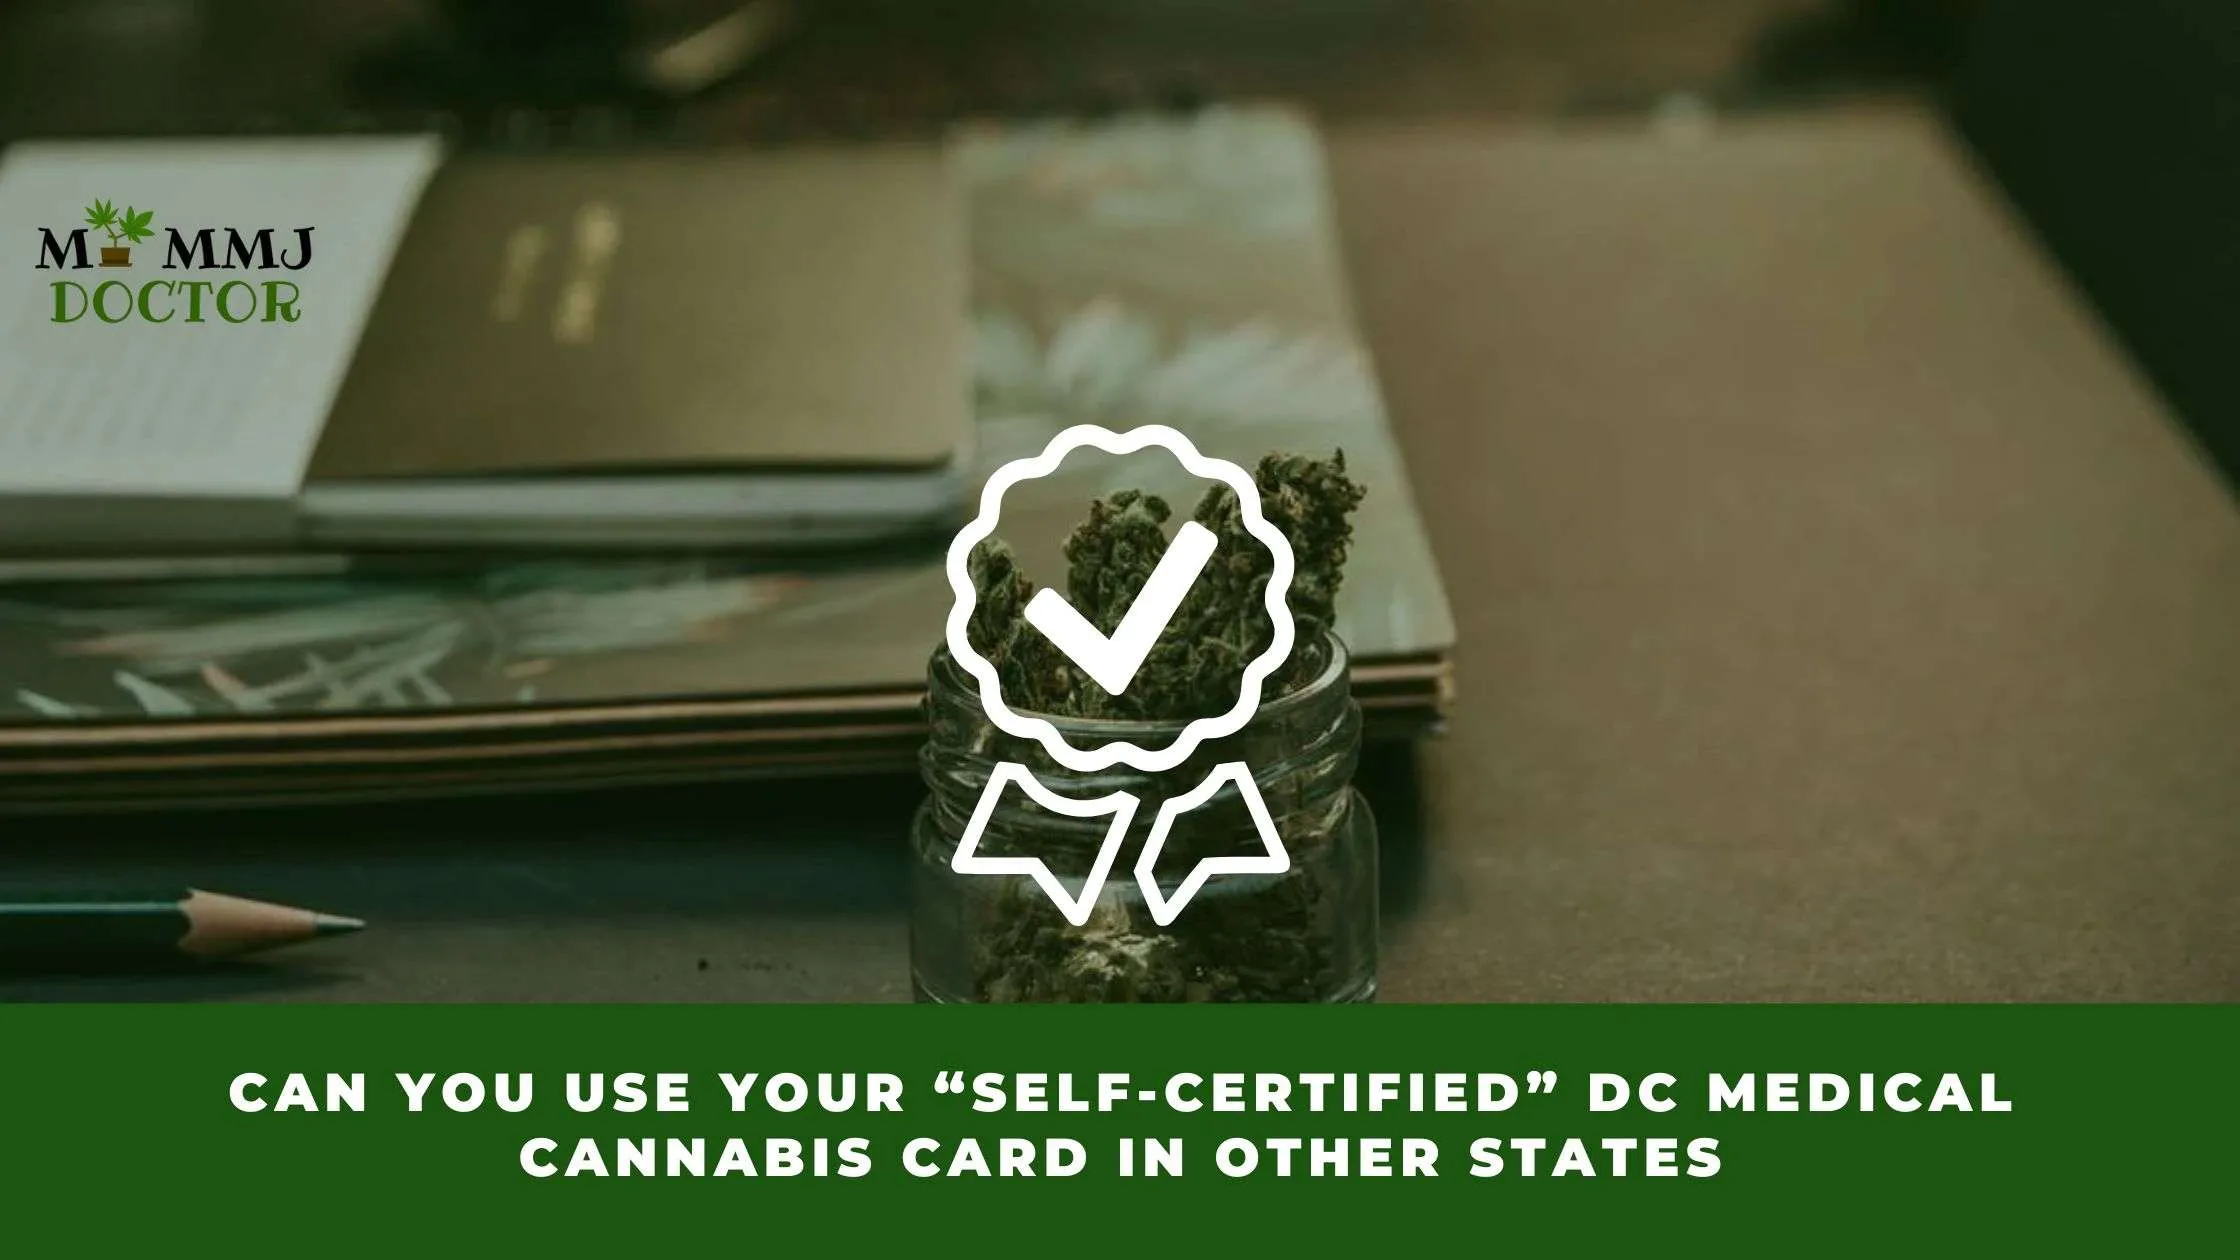 Can you use your “self-certified” DC medical cannabis card in other states